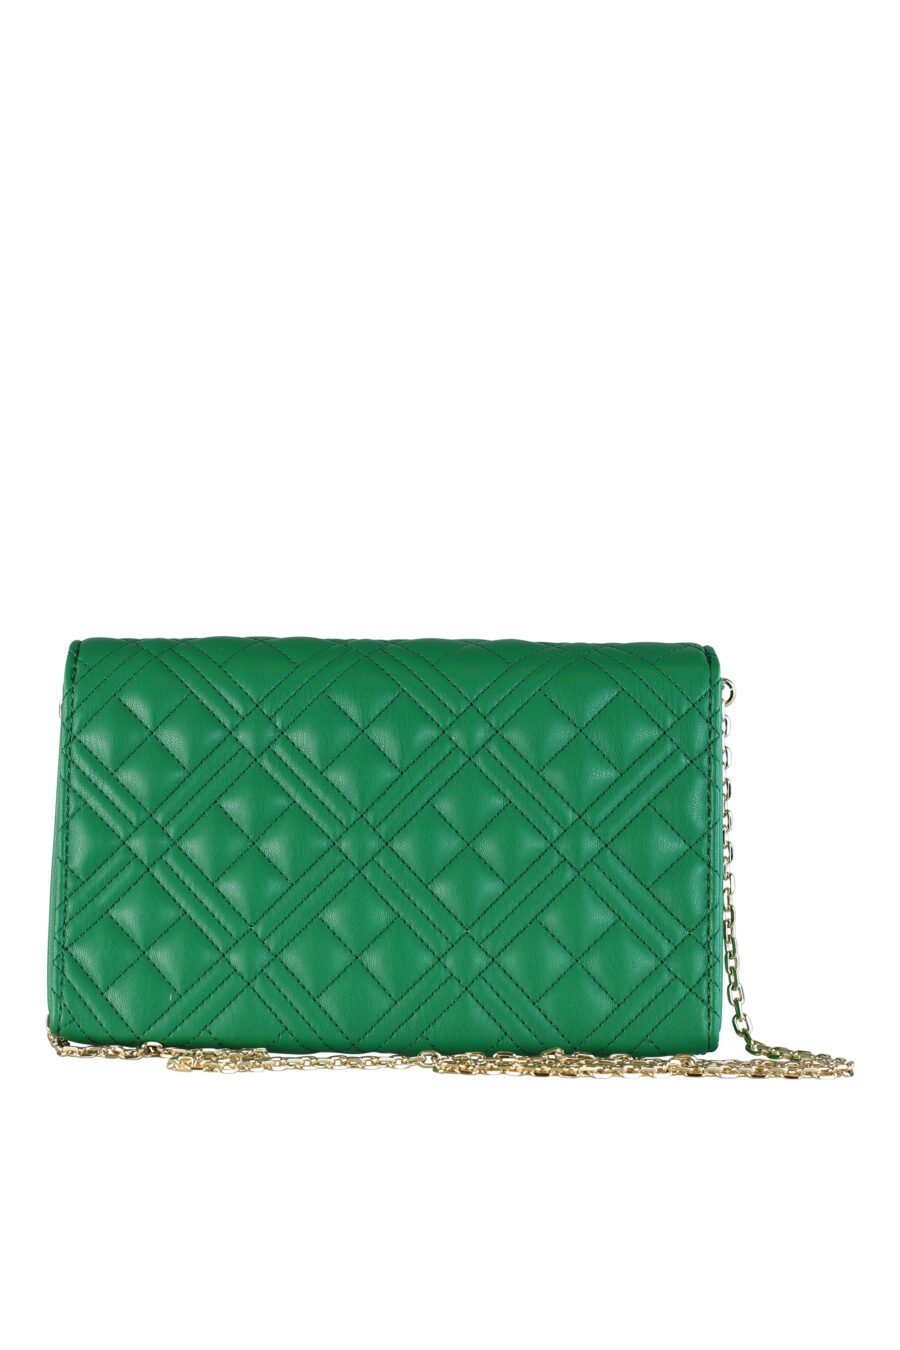 Green quilted shoulder bag with chain and "lettering" logo - IMG 0419